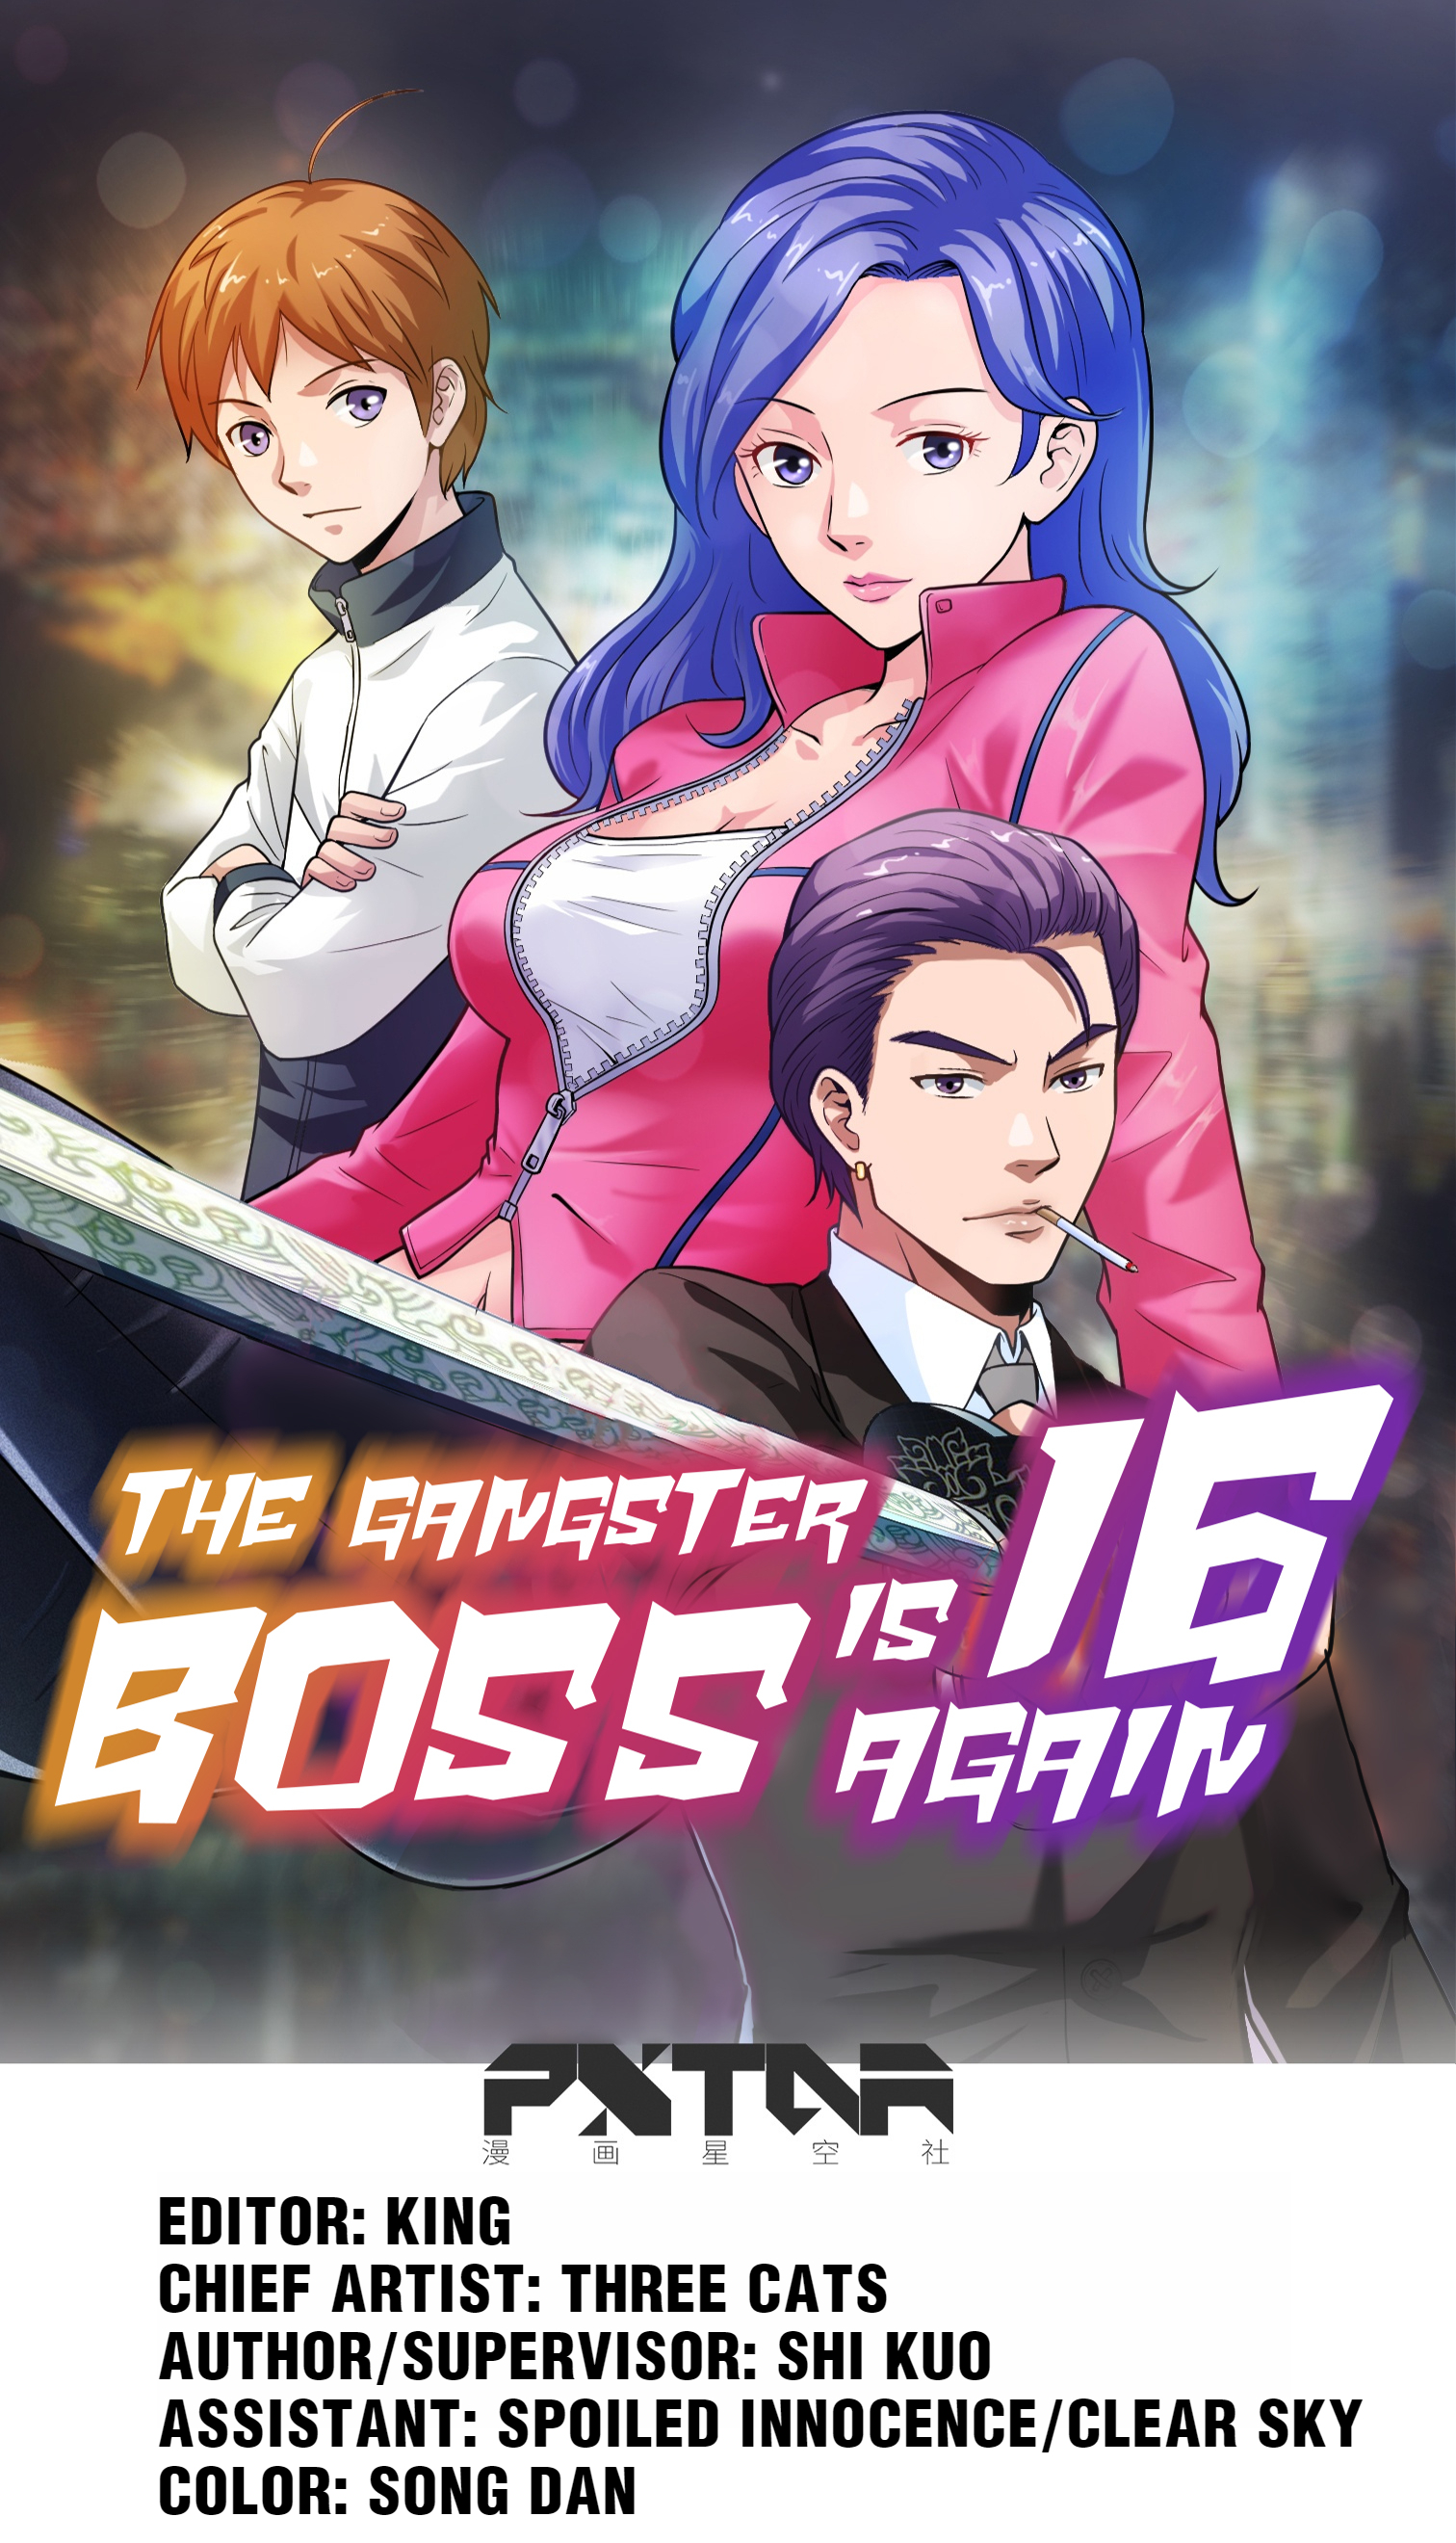 The Gangster Boss Is 16 Again - Page 1